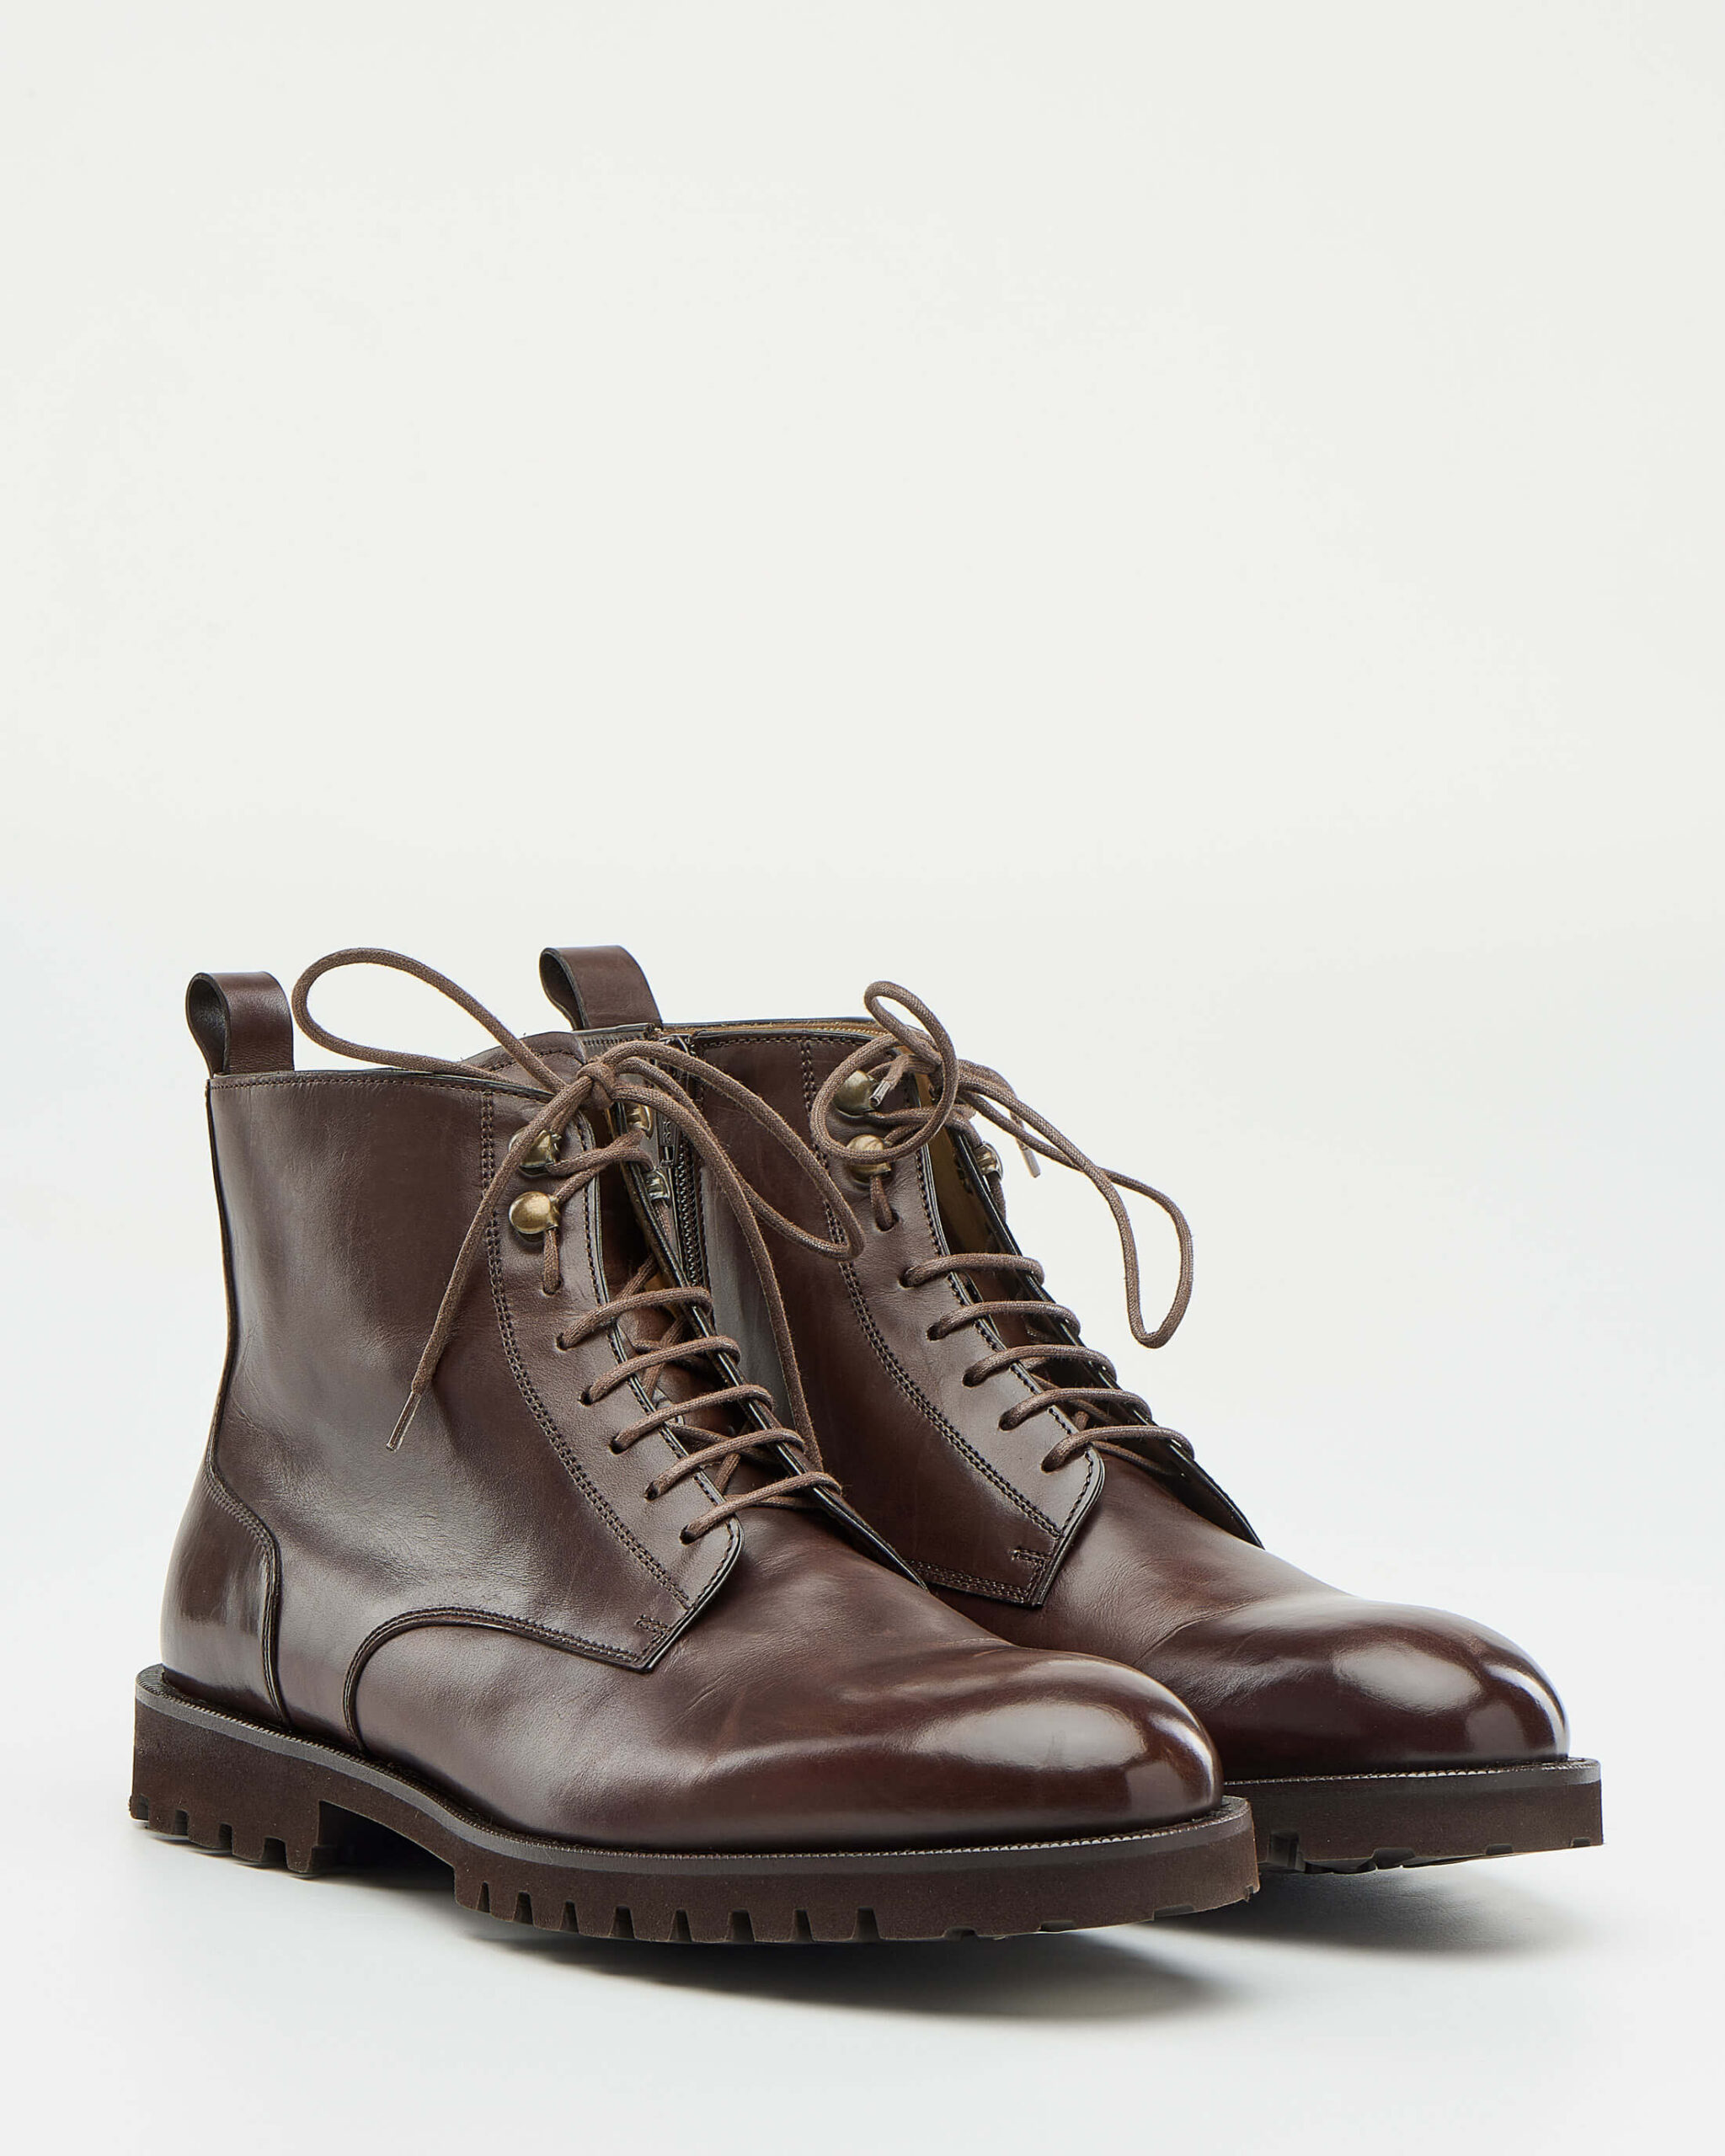 Luis Onofre Portuguese Shoes FW23 – Enigma Collection – HB0681_03 – Parma Brown-2